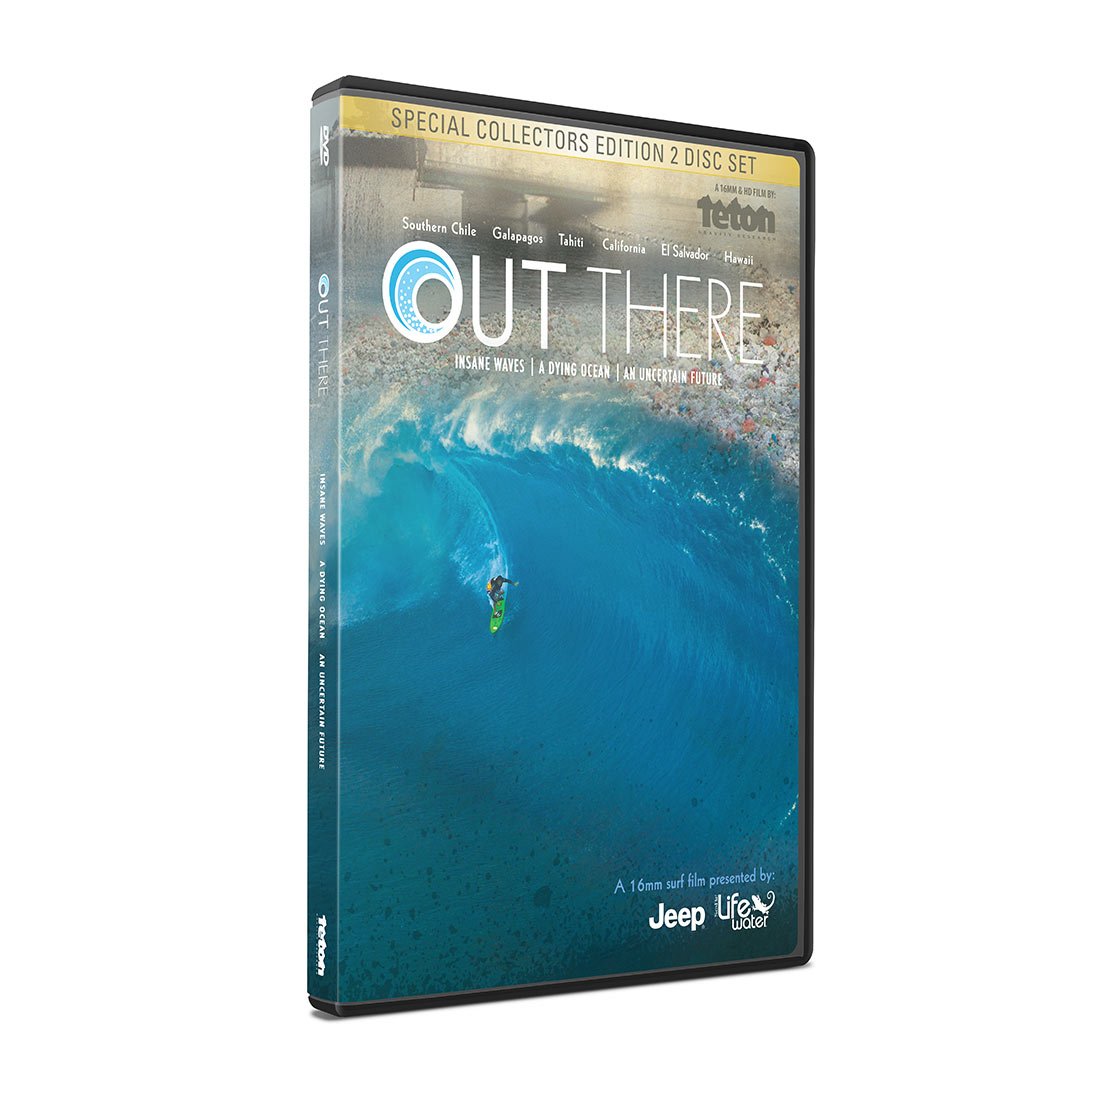 Out There DVD - Teton Gravity Research